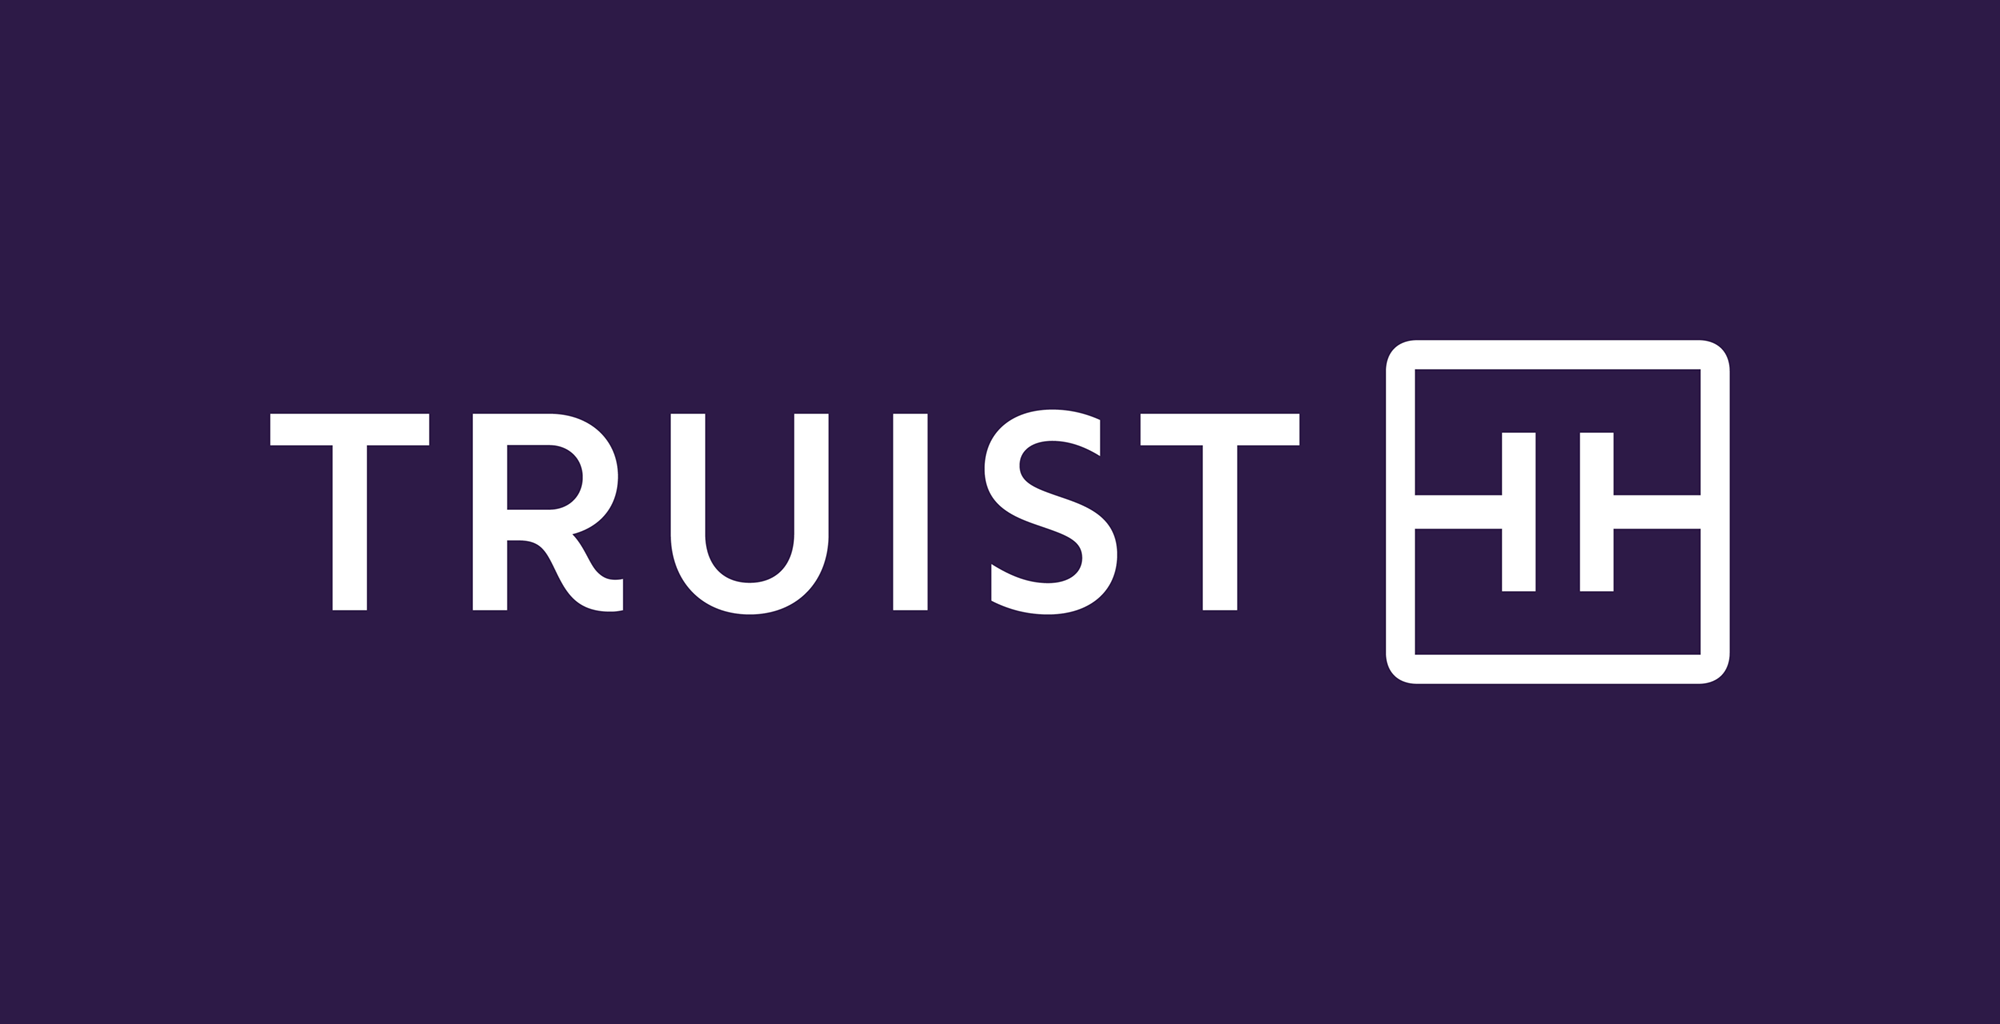 Noted New Name and Logo for Truist by Interbrand